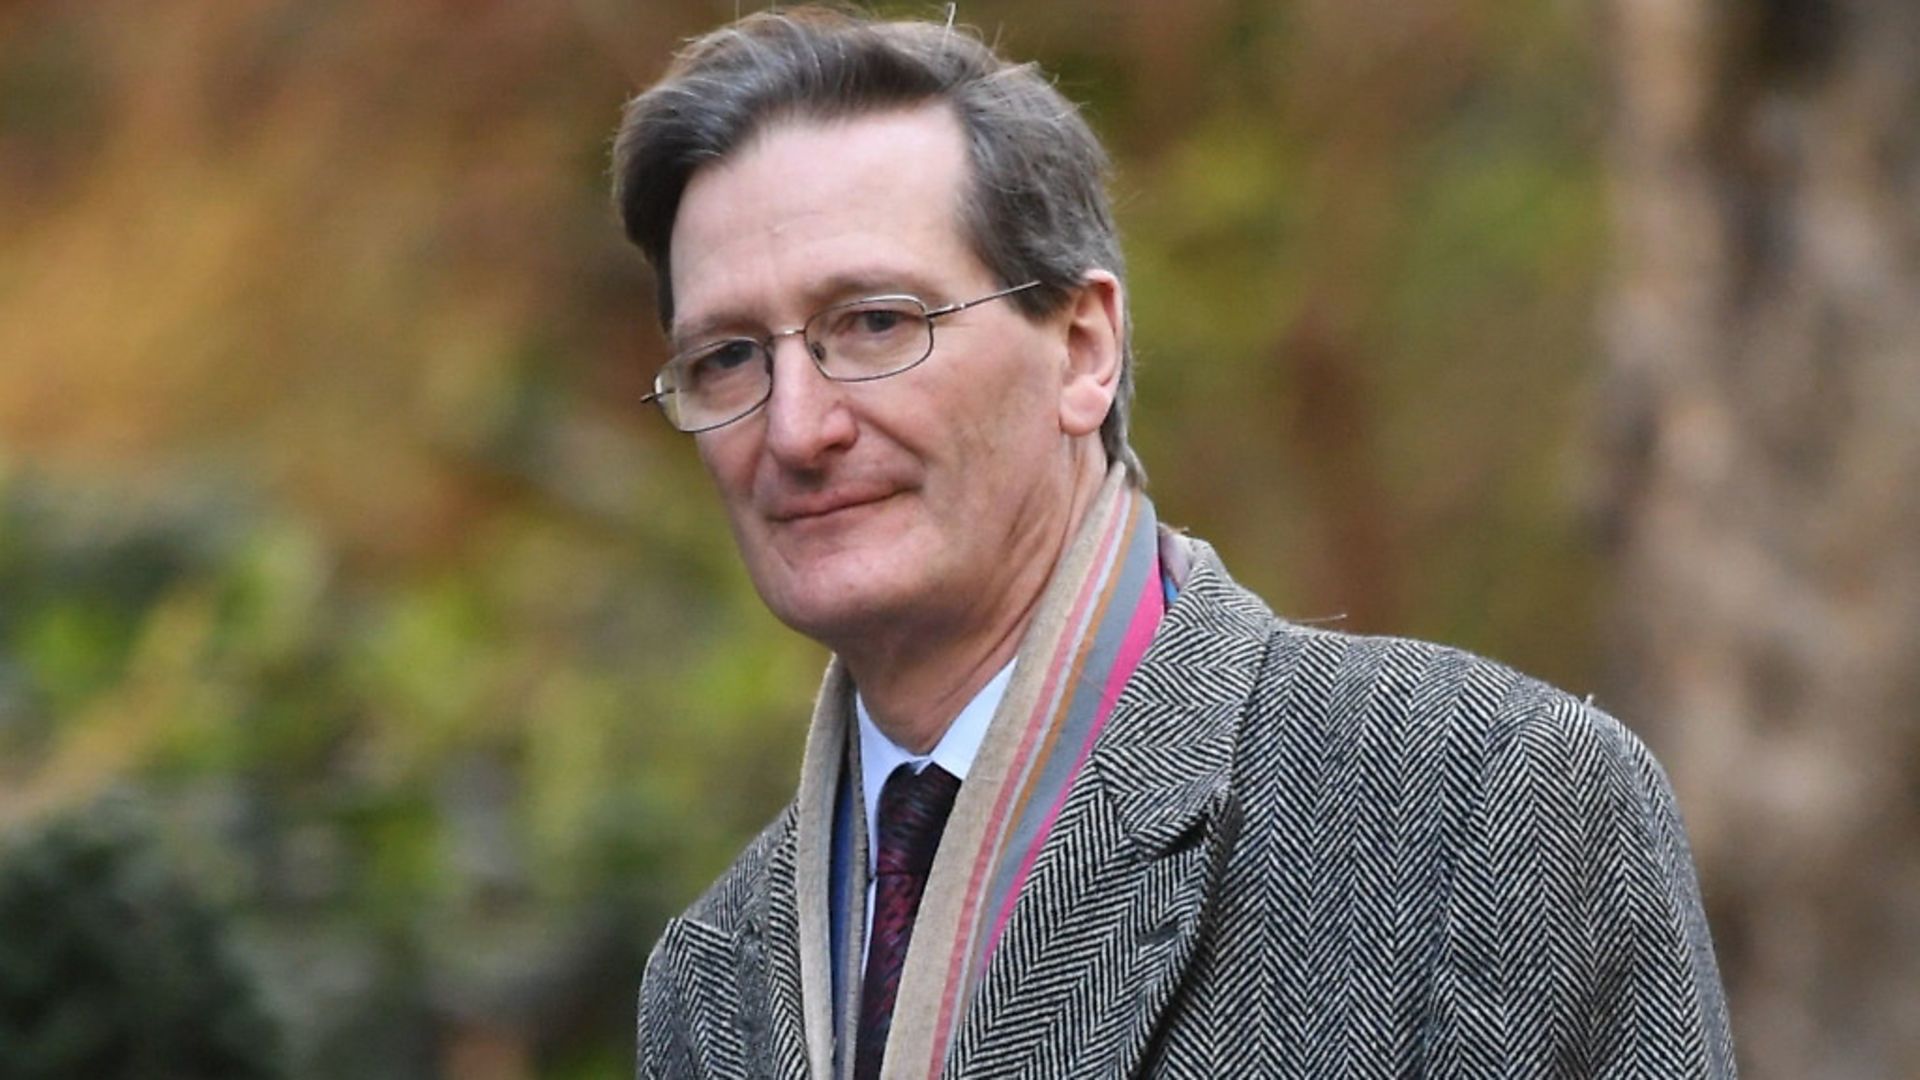 Dominic Grieve has called on Boris Johnson to release a report about alleged Russian interference into British democracy. Picture: Stefan Rousseau/PA Wire/PA Images - Credit: PA Wire/PA Images